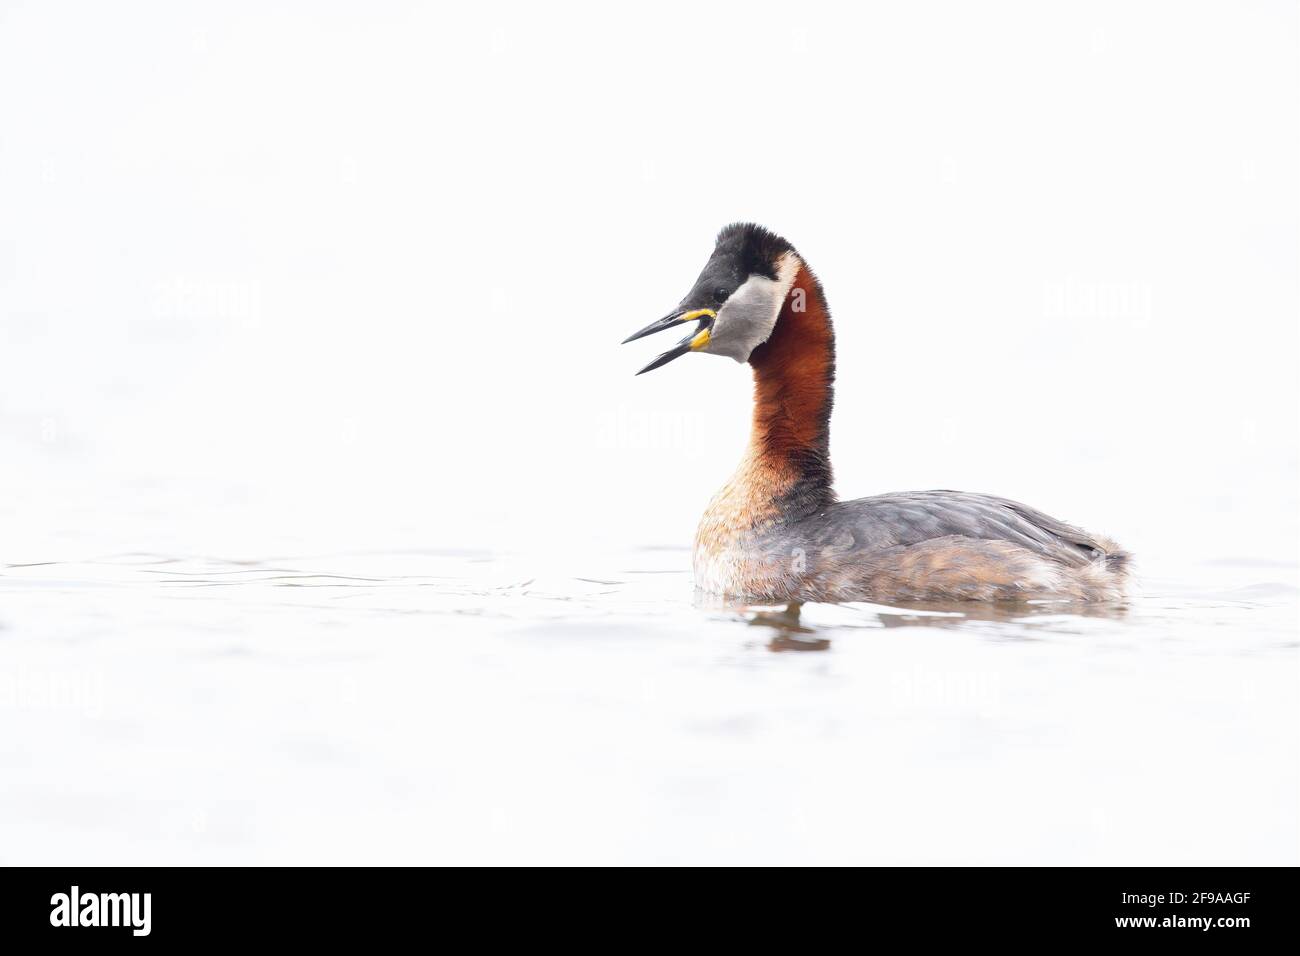 A red necked grebe (Podiceps grisegena) swimming in a lake in a high-key image. Stock Photo